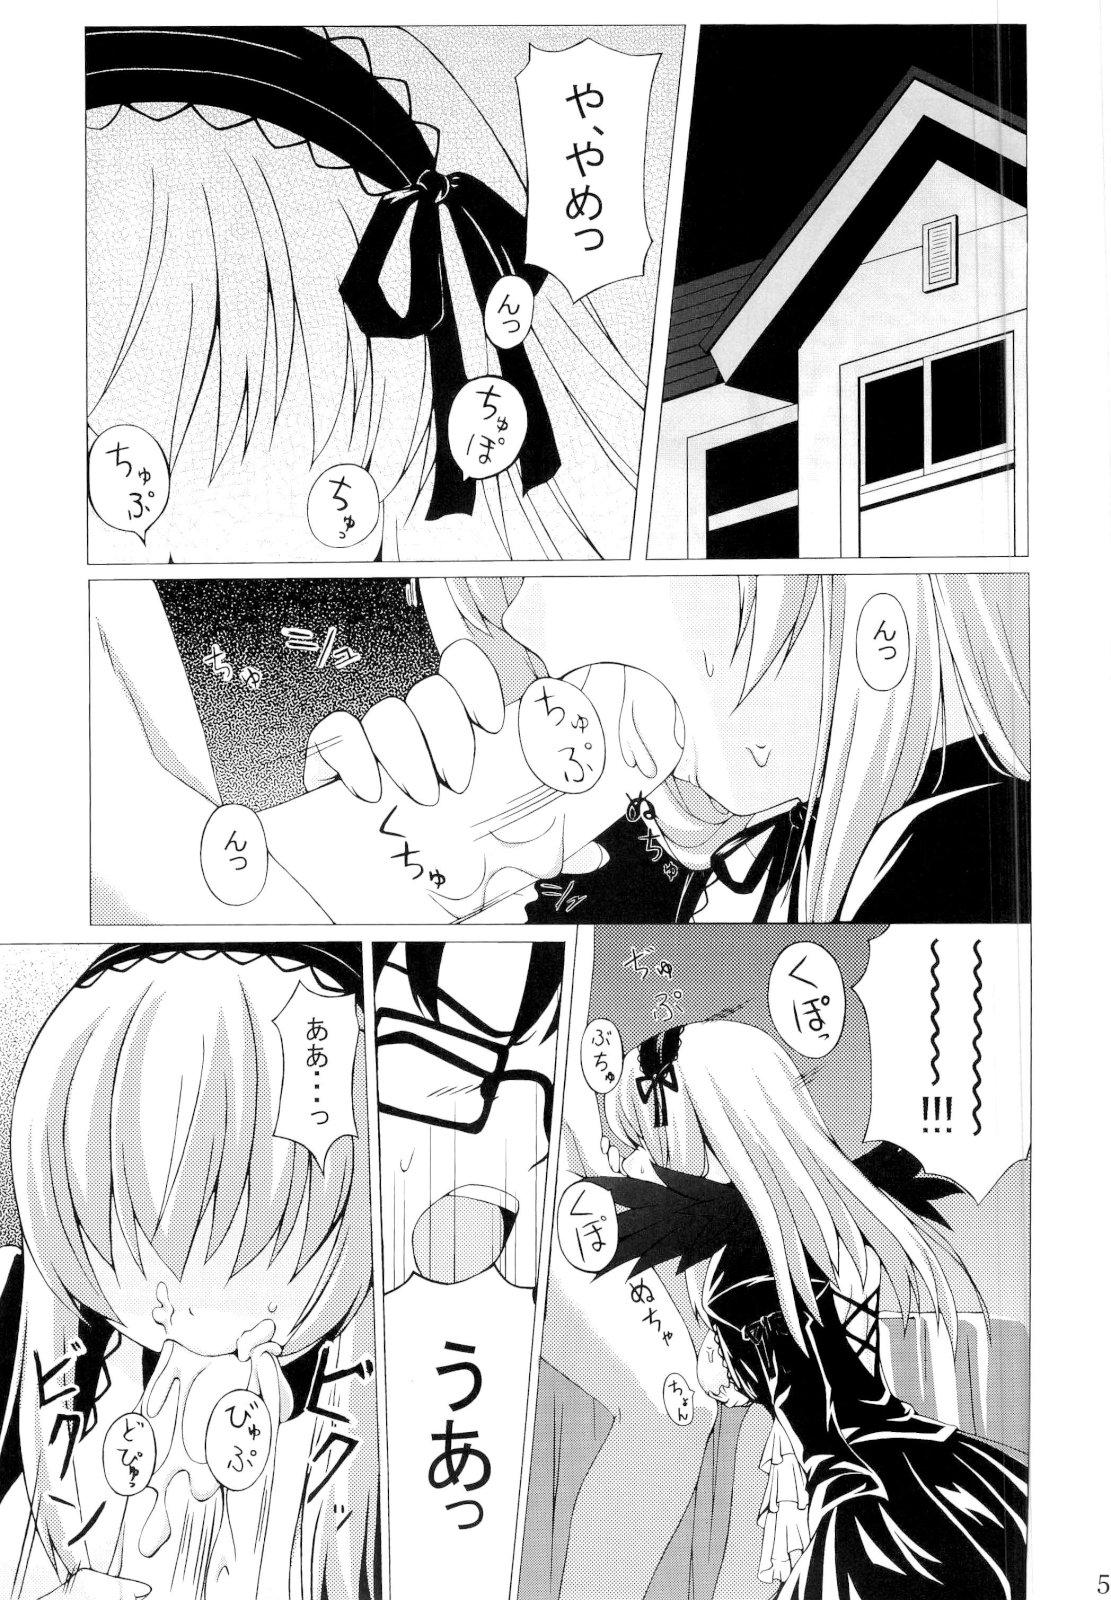 Awesome s-two - Rozen maiden Relax - Page 3